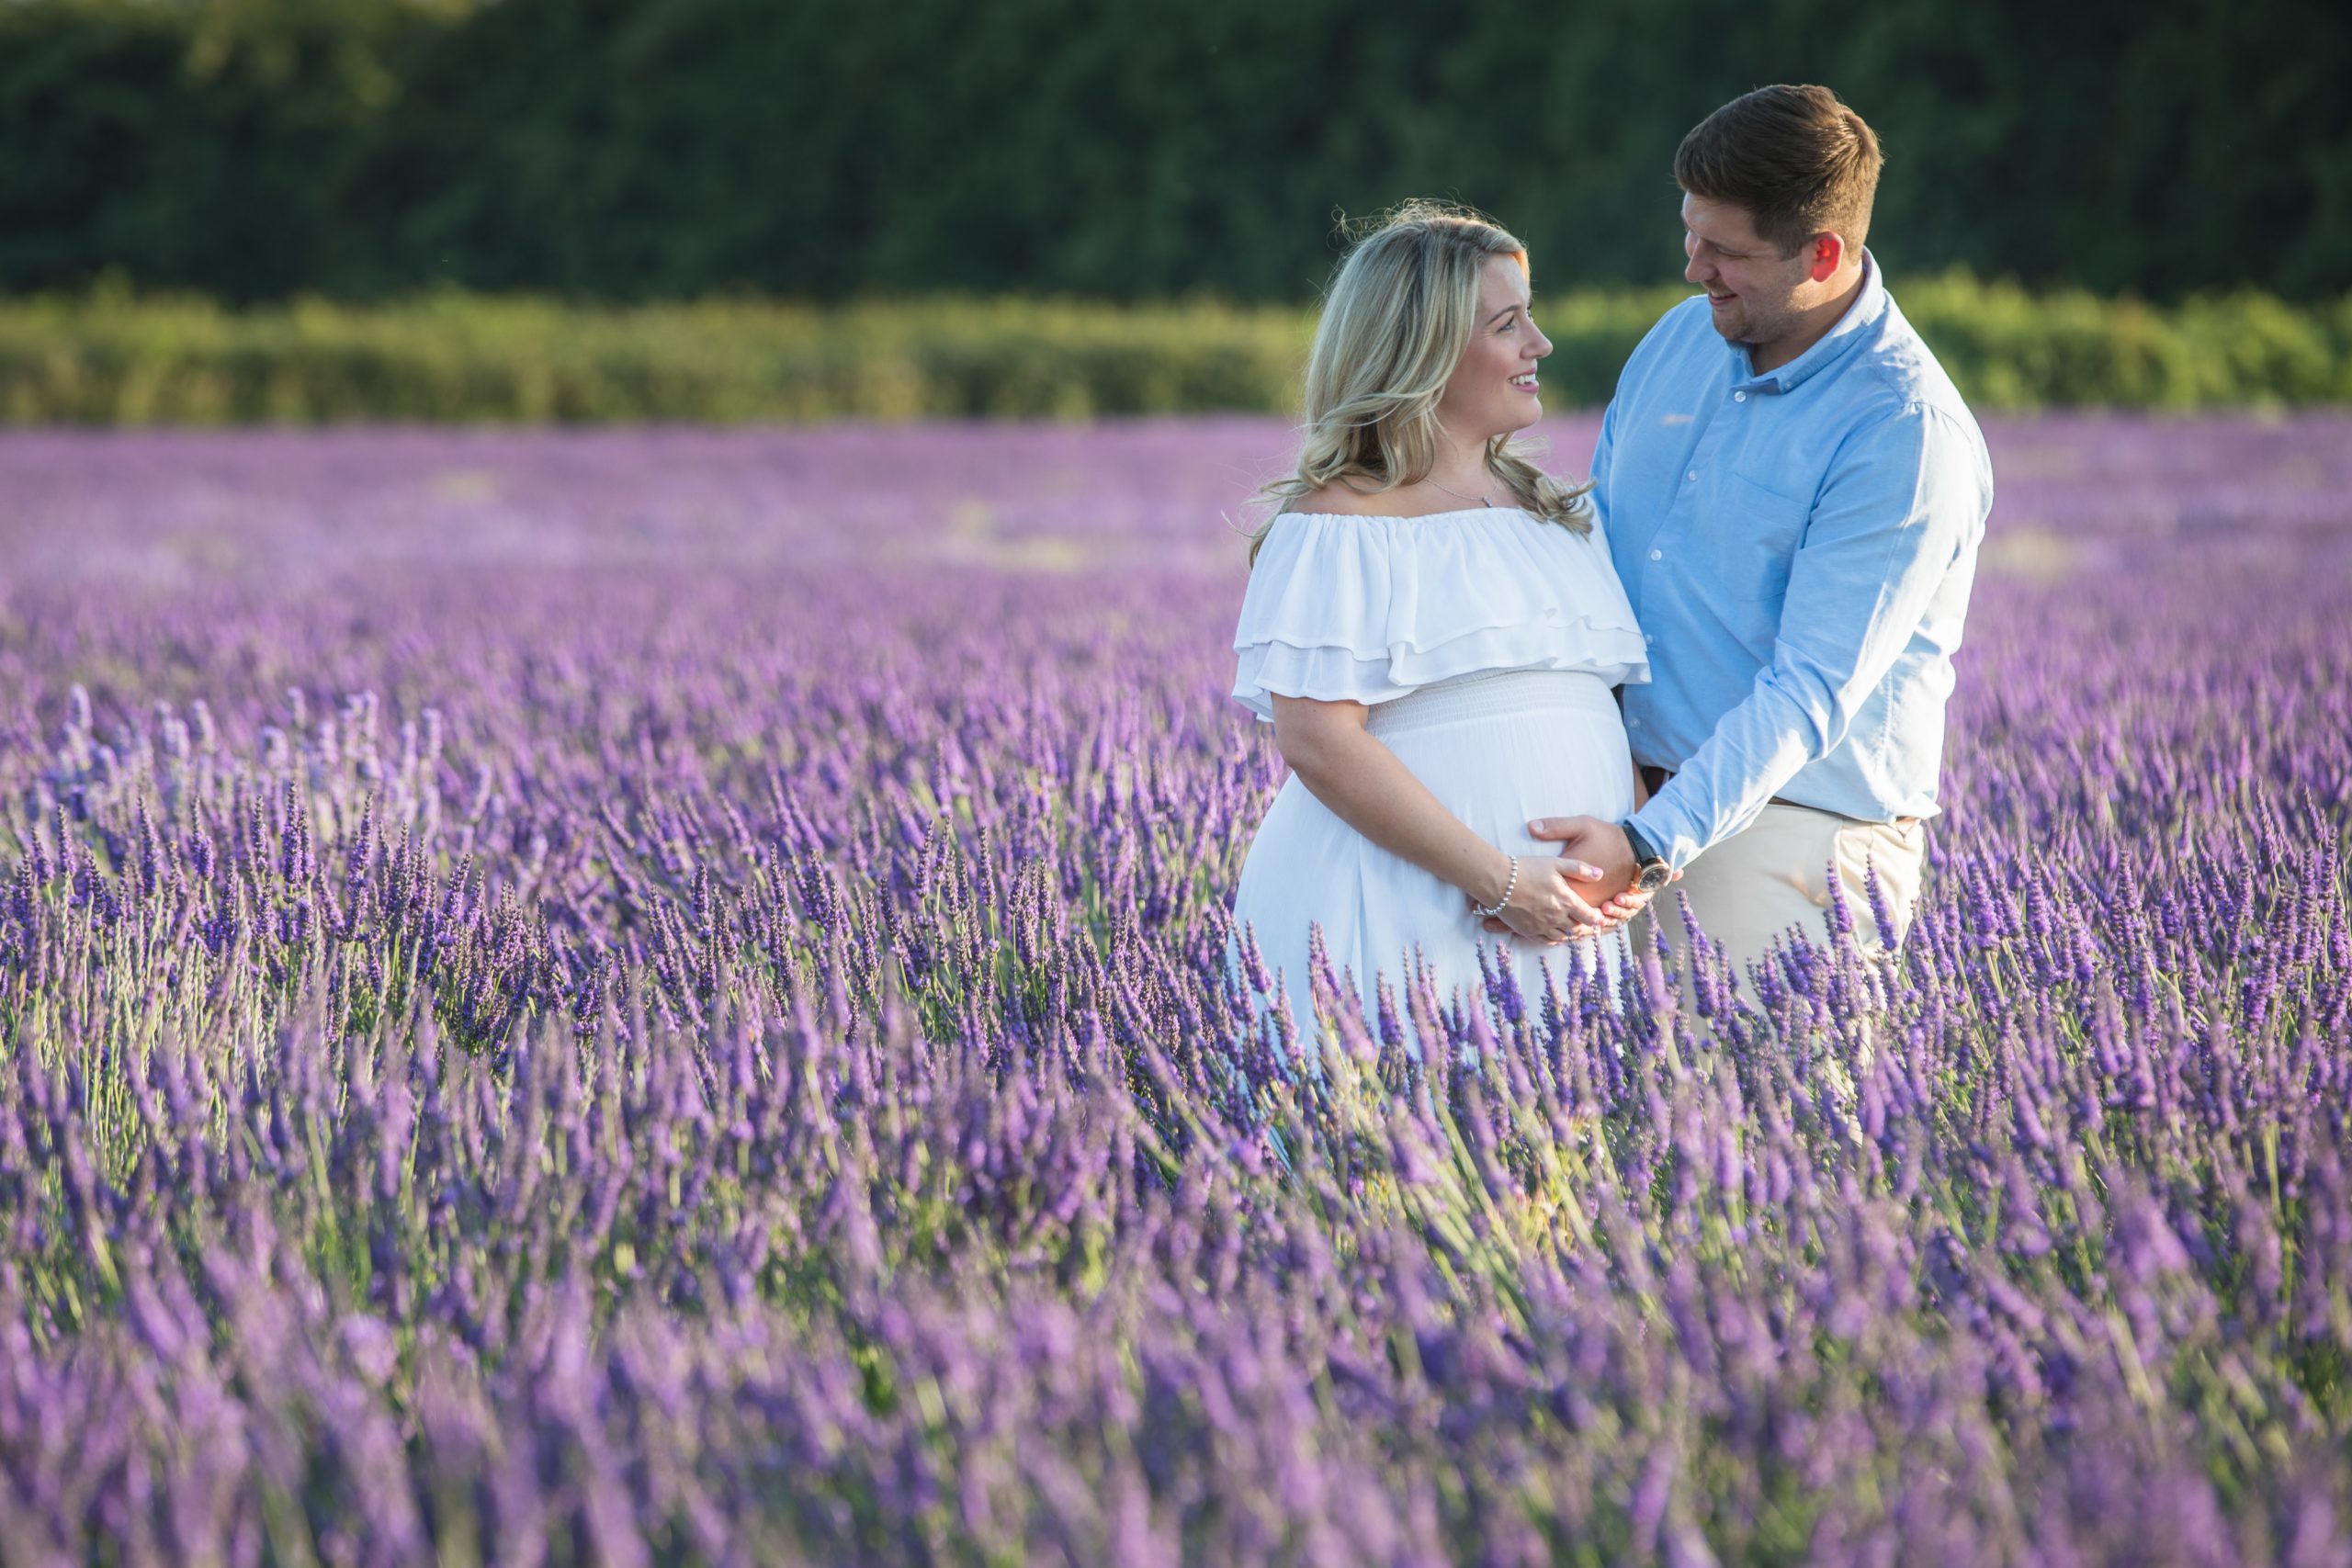 Maternity photographer in a lavender field in Kent